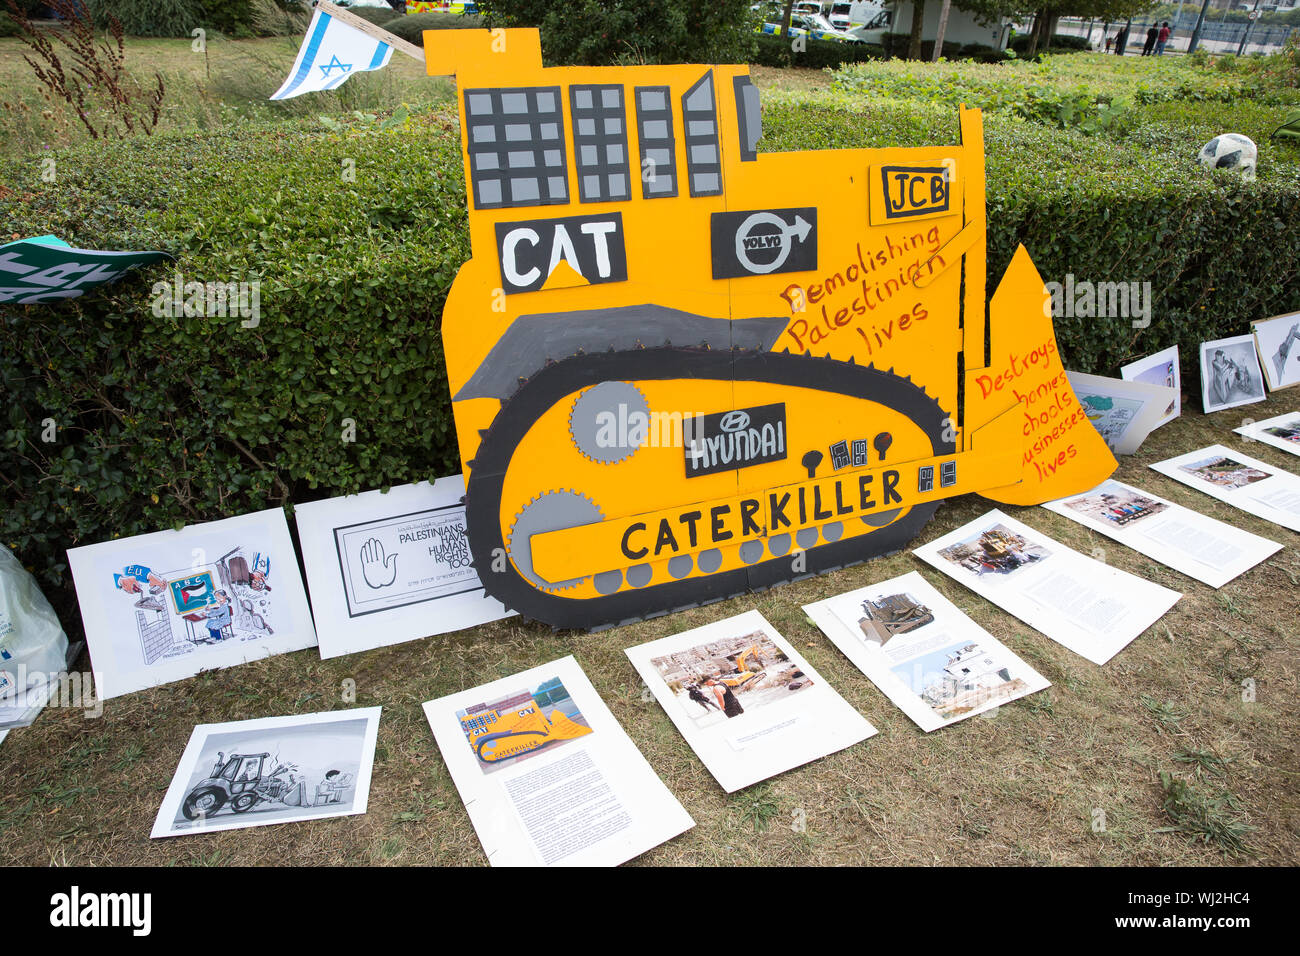 London, UK. 2 September, 2019. A model of a digger vehicle produced by companies such as Caterpillar, Volvo, JCB and Hyundai displayed by activists ou Stock Photo